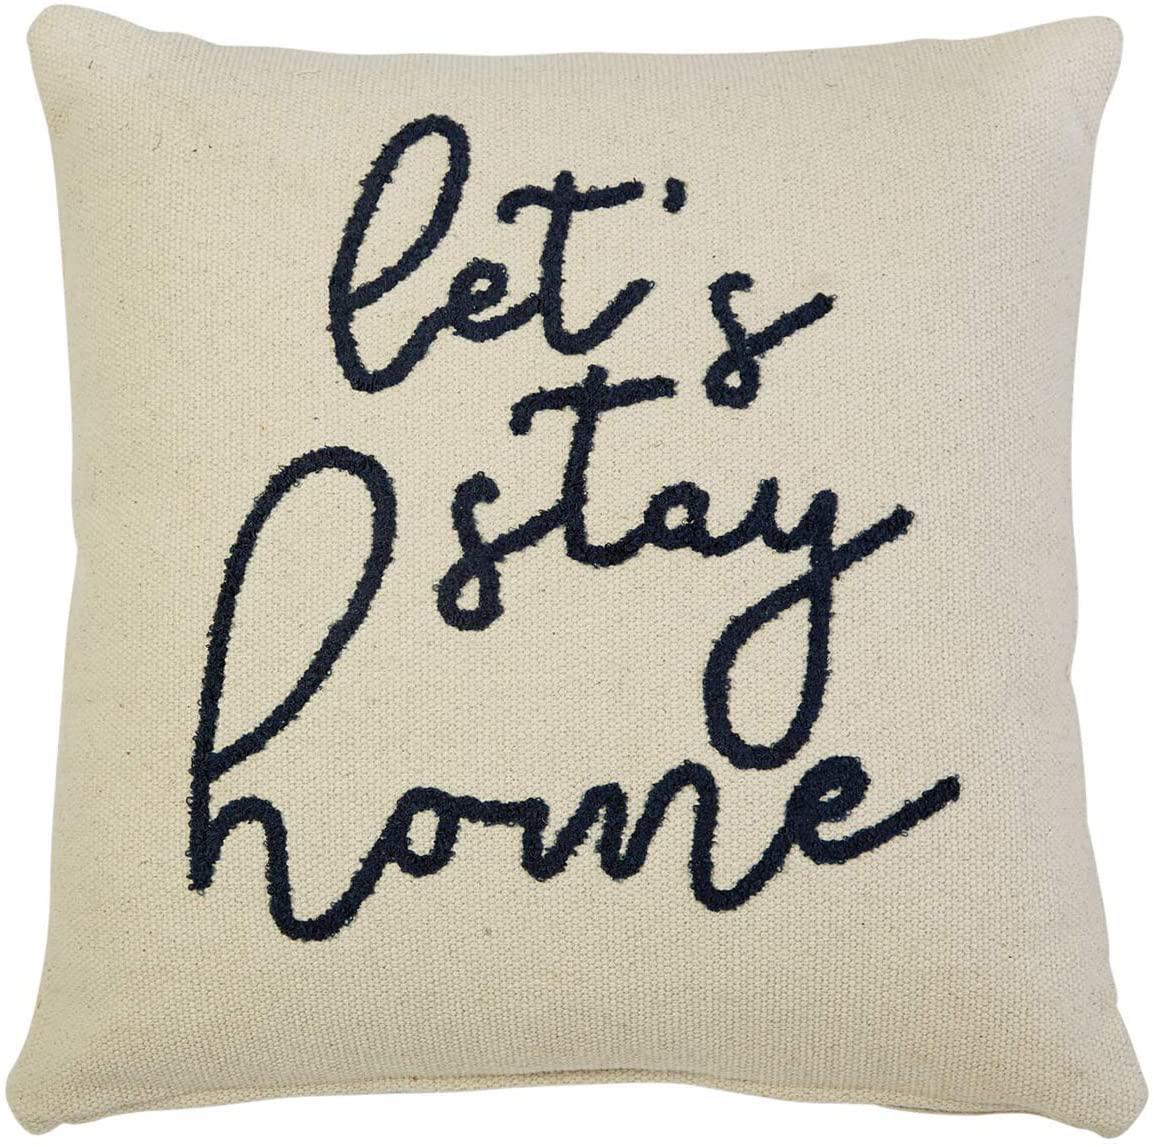 LETS STAY HOME PILLOW